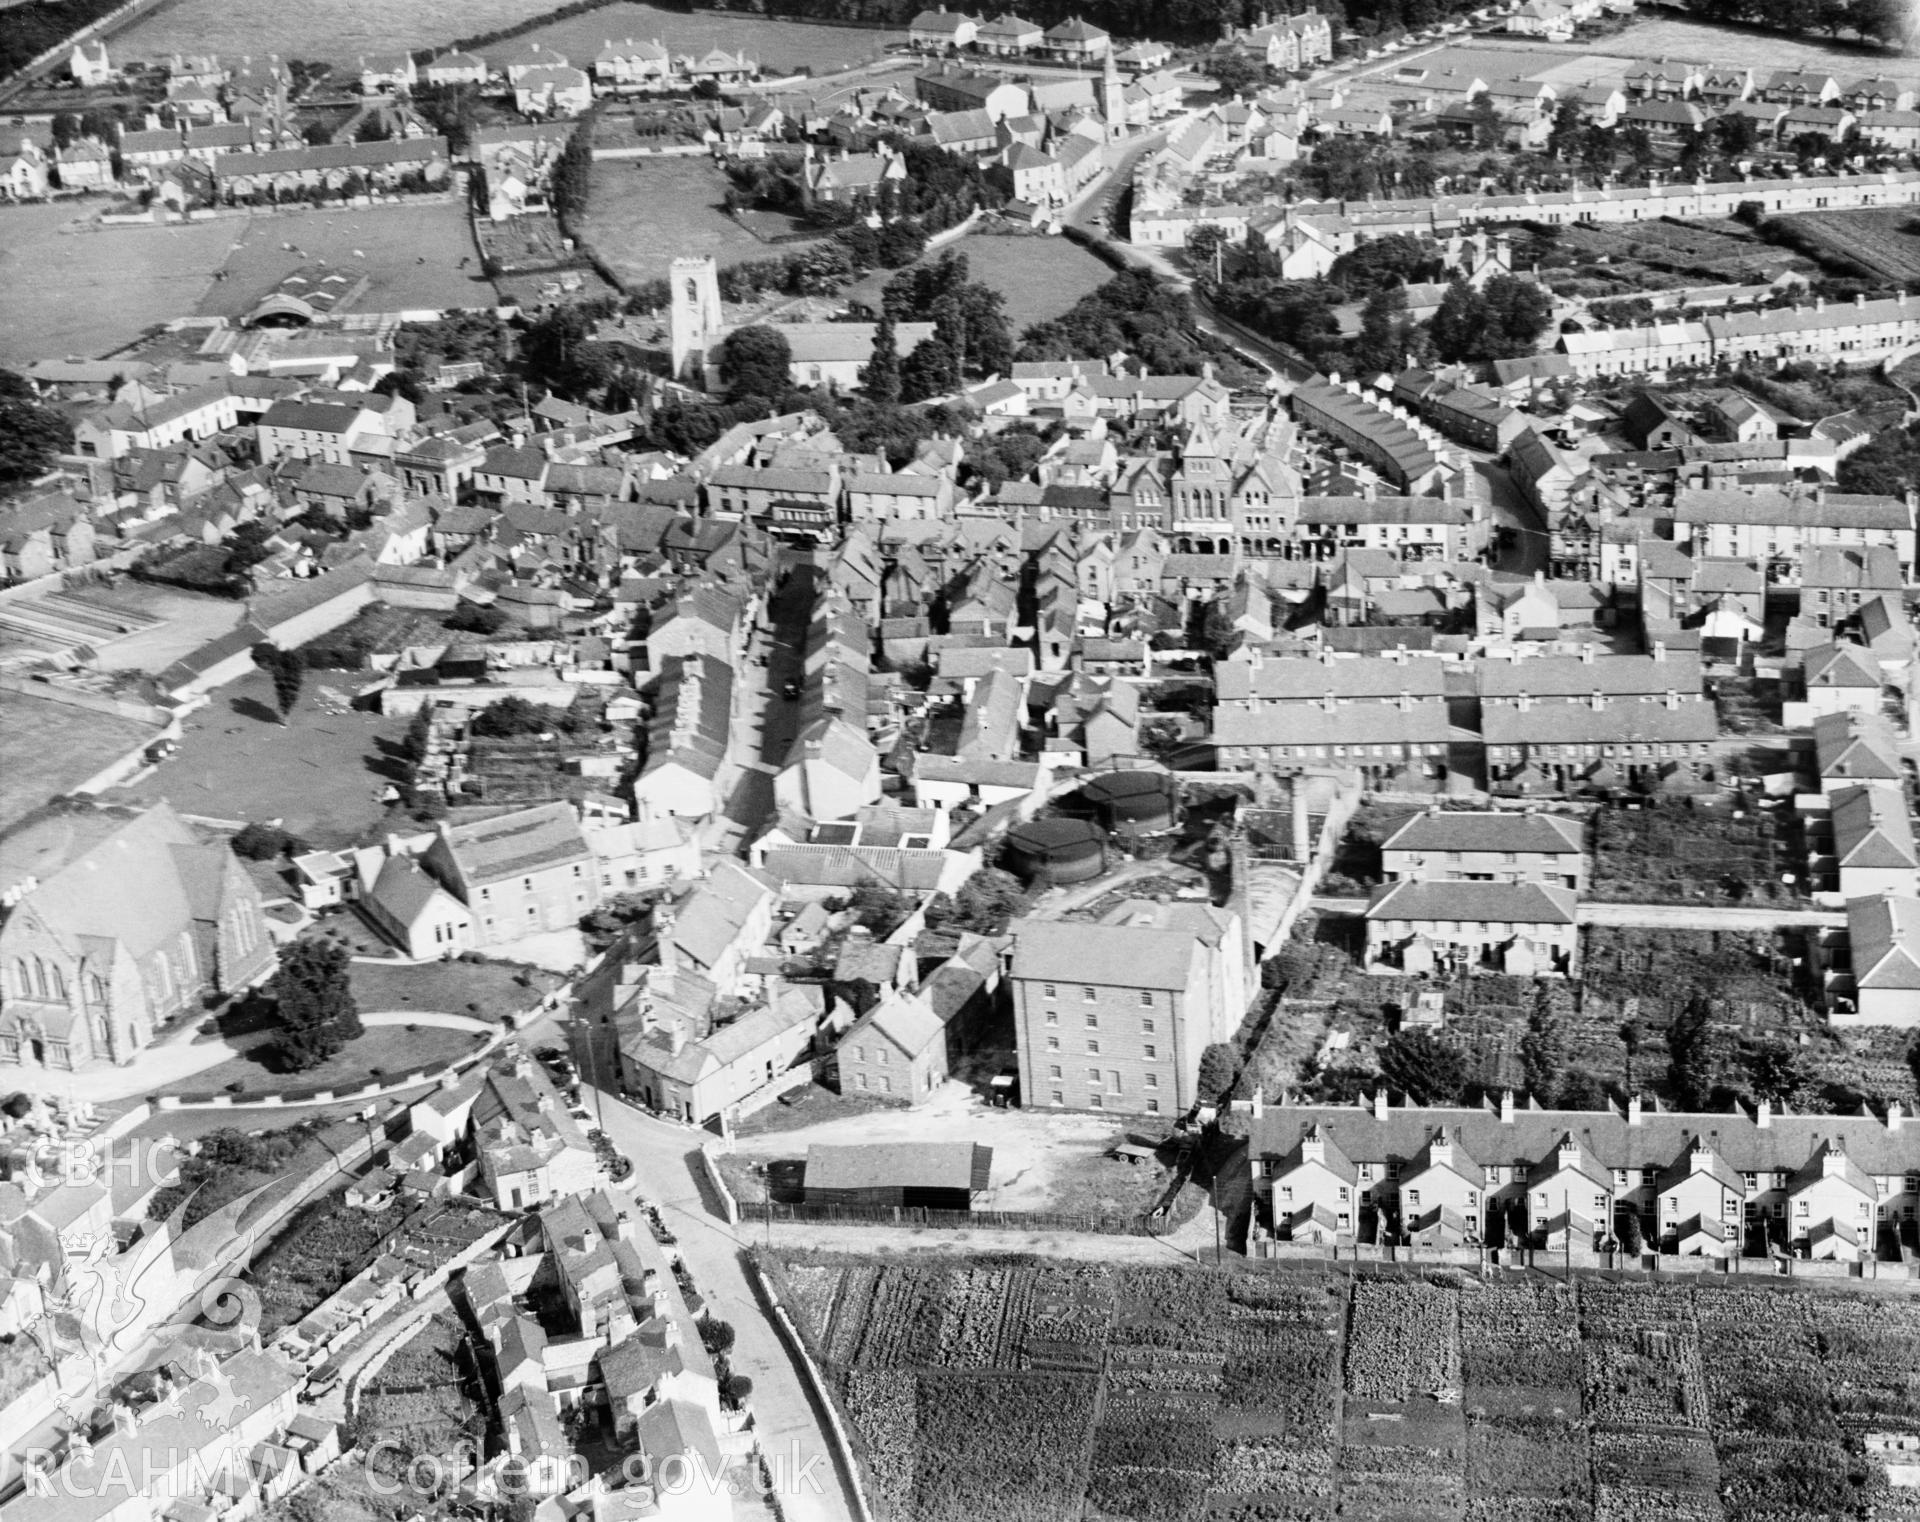 General view of Abergele, oblique aerial view. 5?x4? black and white glass plate negative.